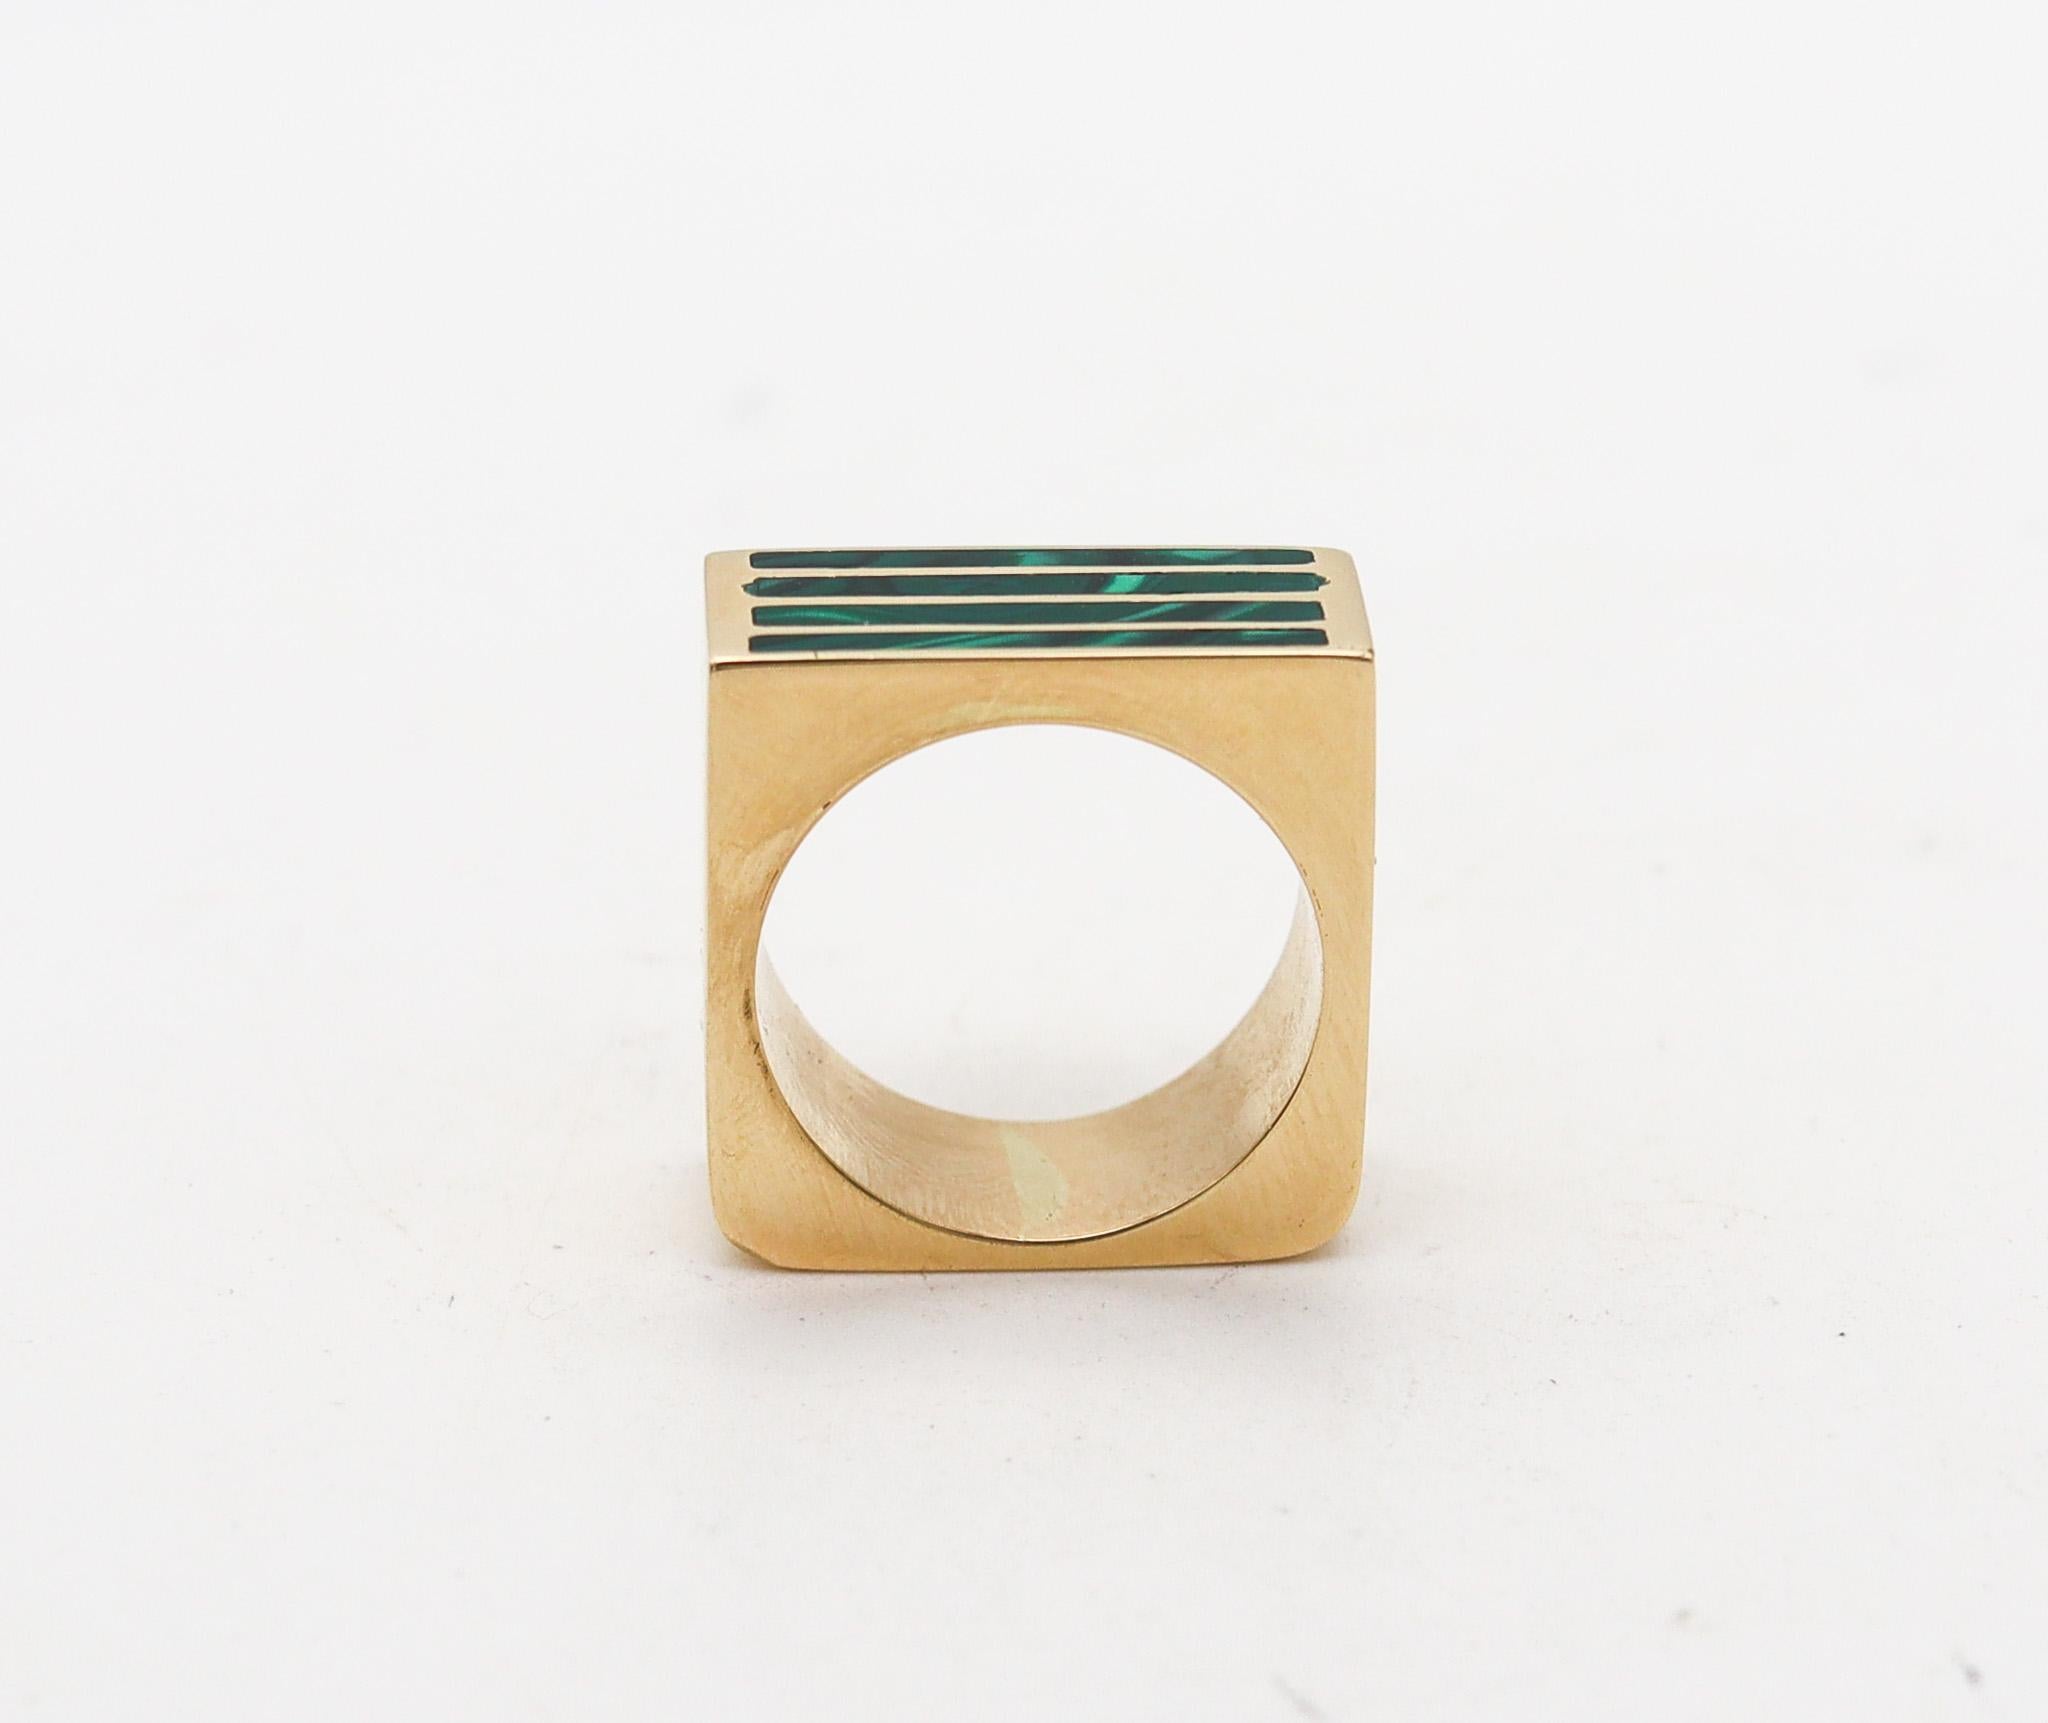 Geometric 1970 Modernist Square Ring In 18Kt Yellow Gold With Inlaid Malachite For Sale 1